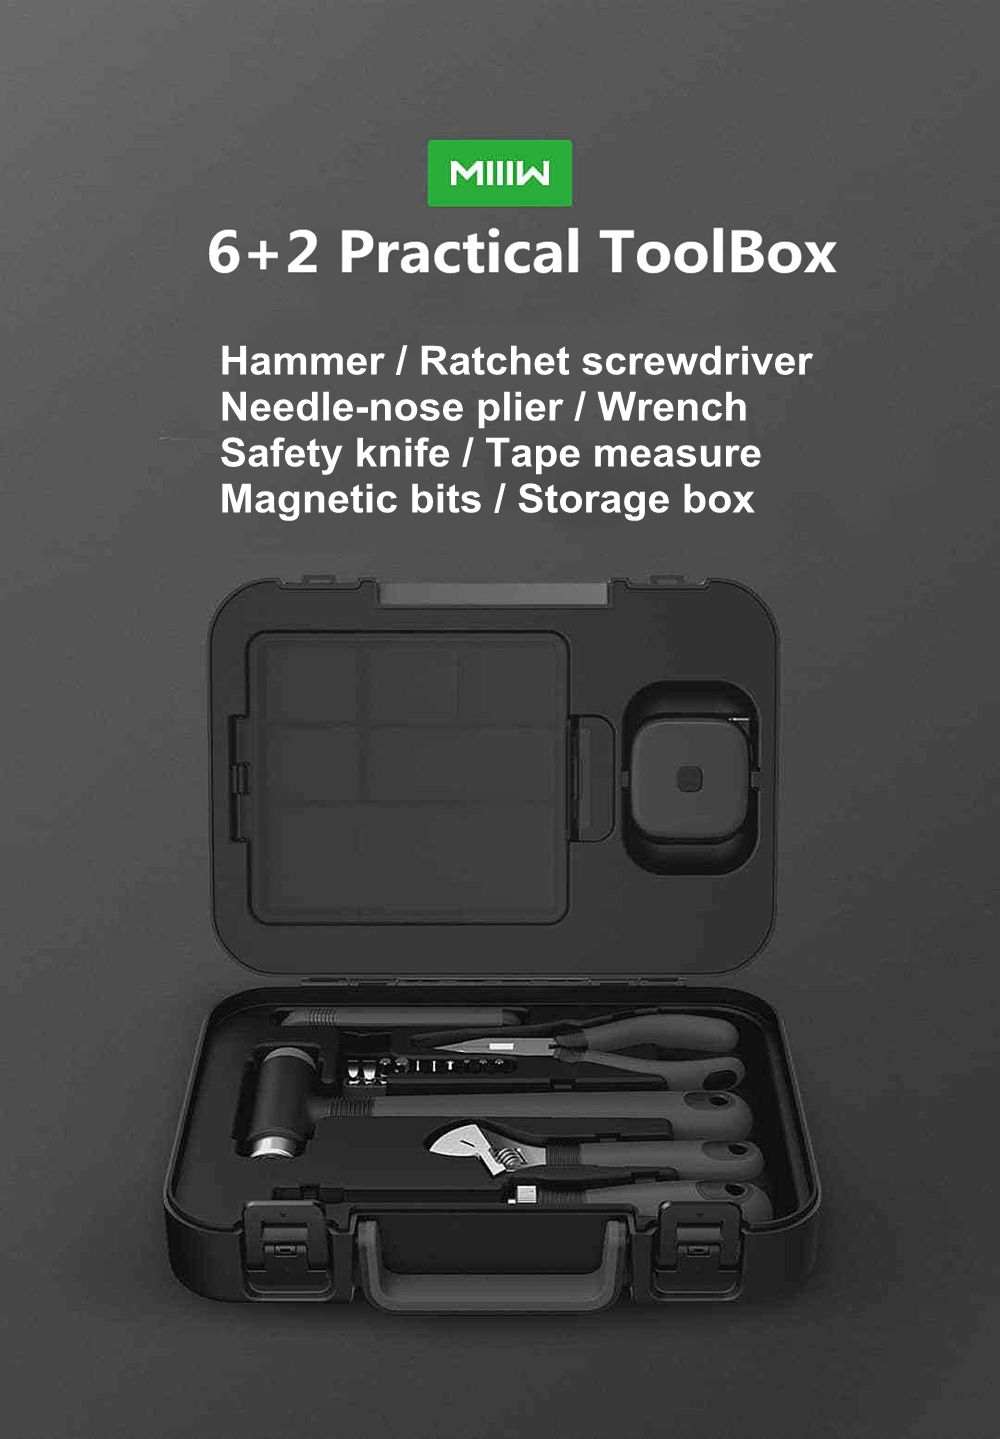 MIIIW-DIY-Tool-Kit-General-Household-Hand-Tool-with-Screwdriver-Wrench-Hammer-Ruler-ToolBox-1375523